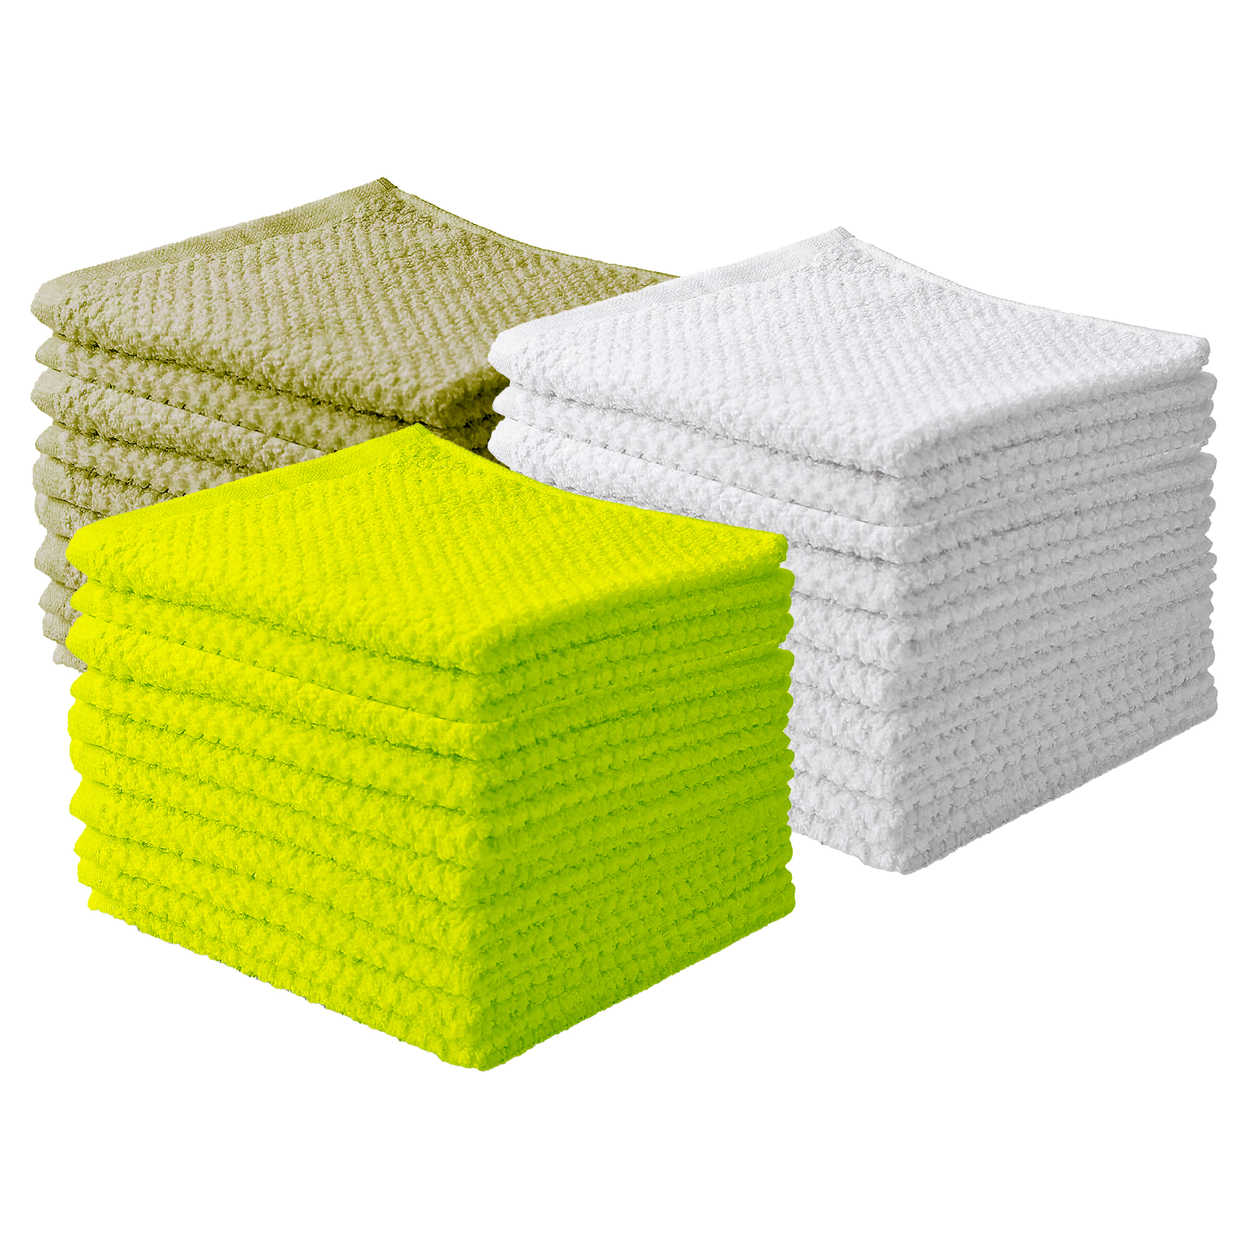 50-Pack: Multipurpose Super Absorbent Ultra Soft 100% Cotton Ring Spun Stitched Wash Cloths